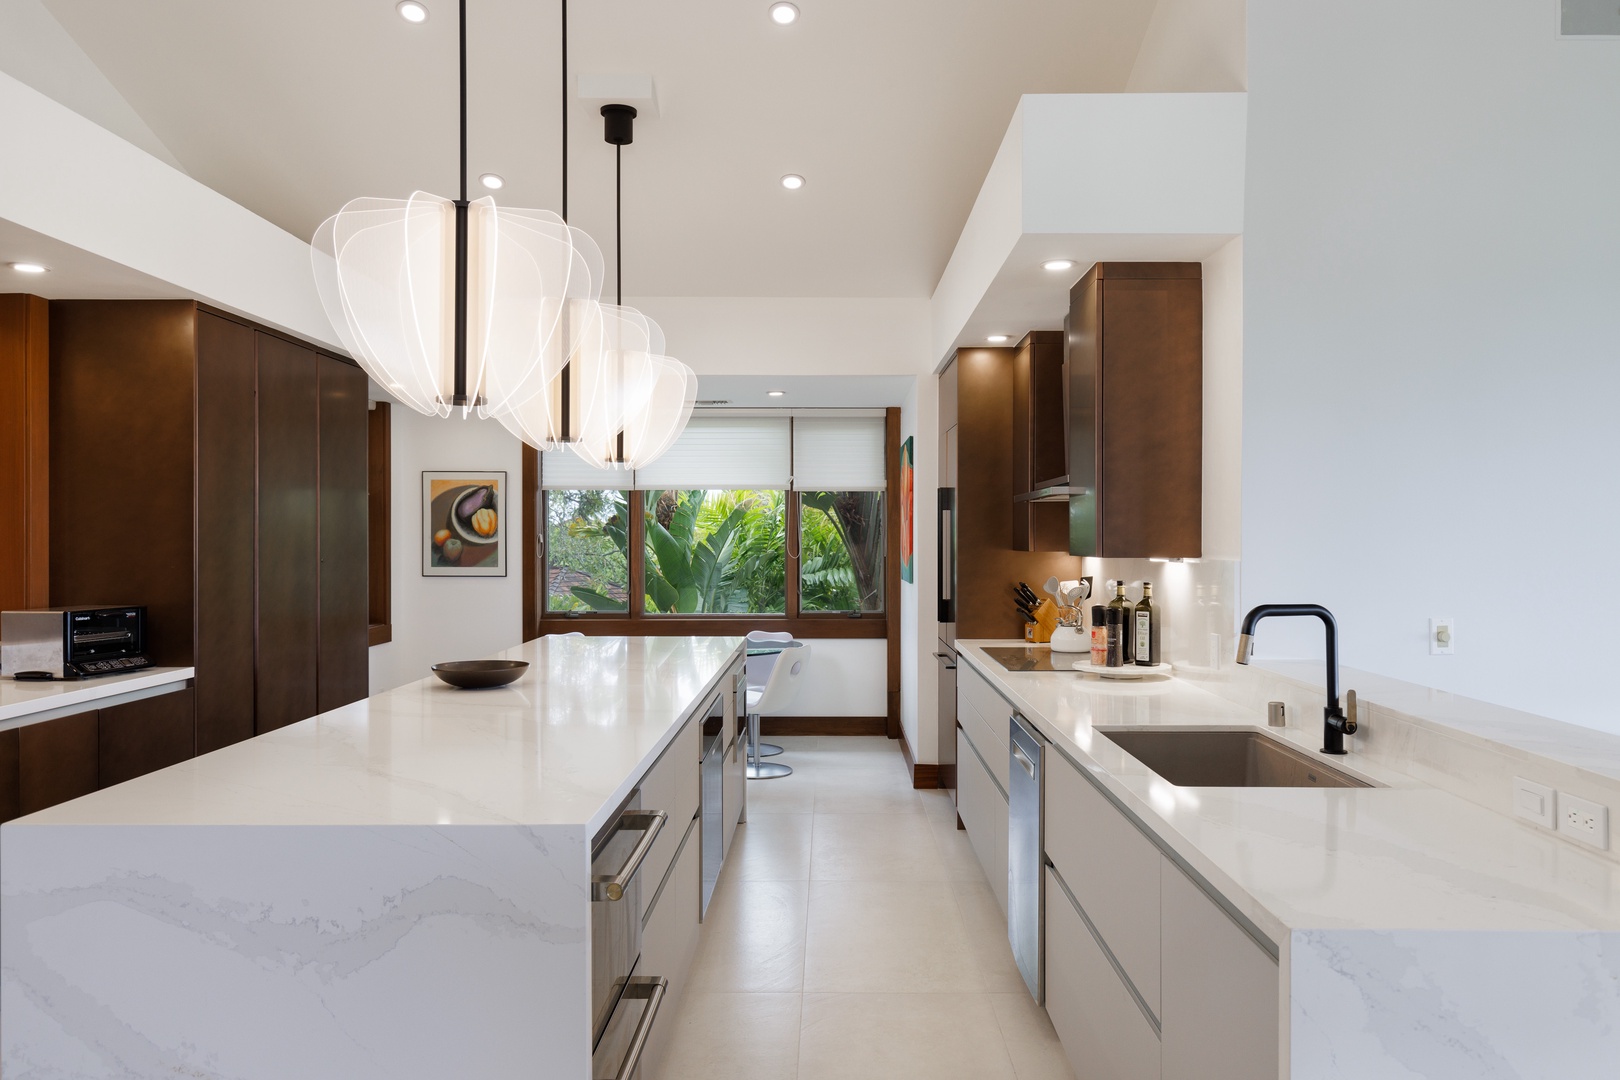 Kailua Kona Vacation Rentals, Fairway Villa 104A - With top of the line appliances for your culinary ventures.